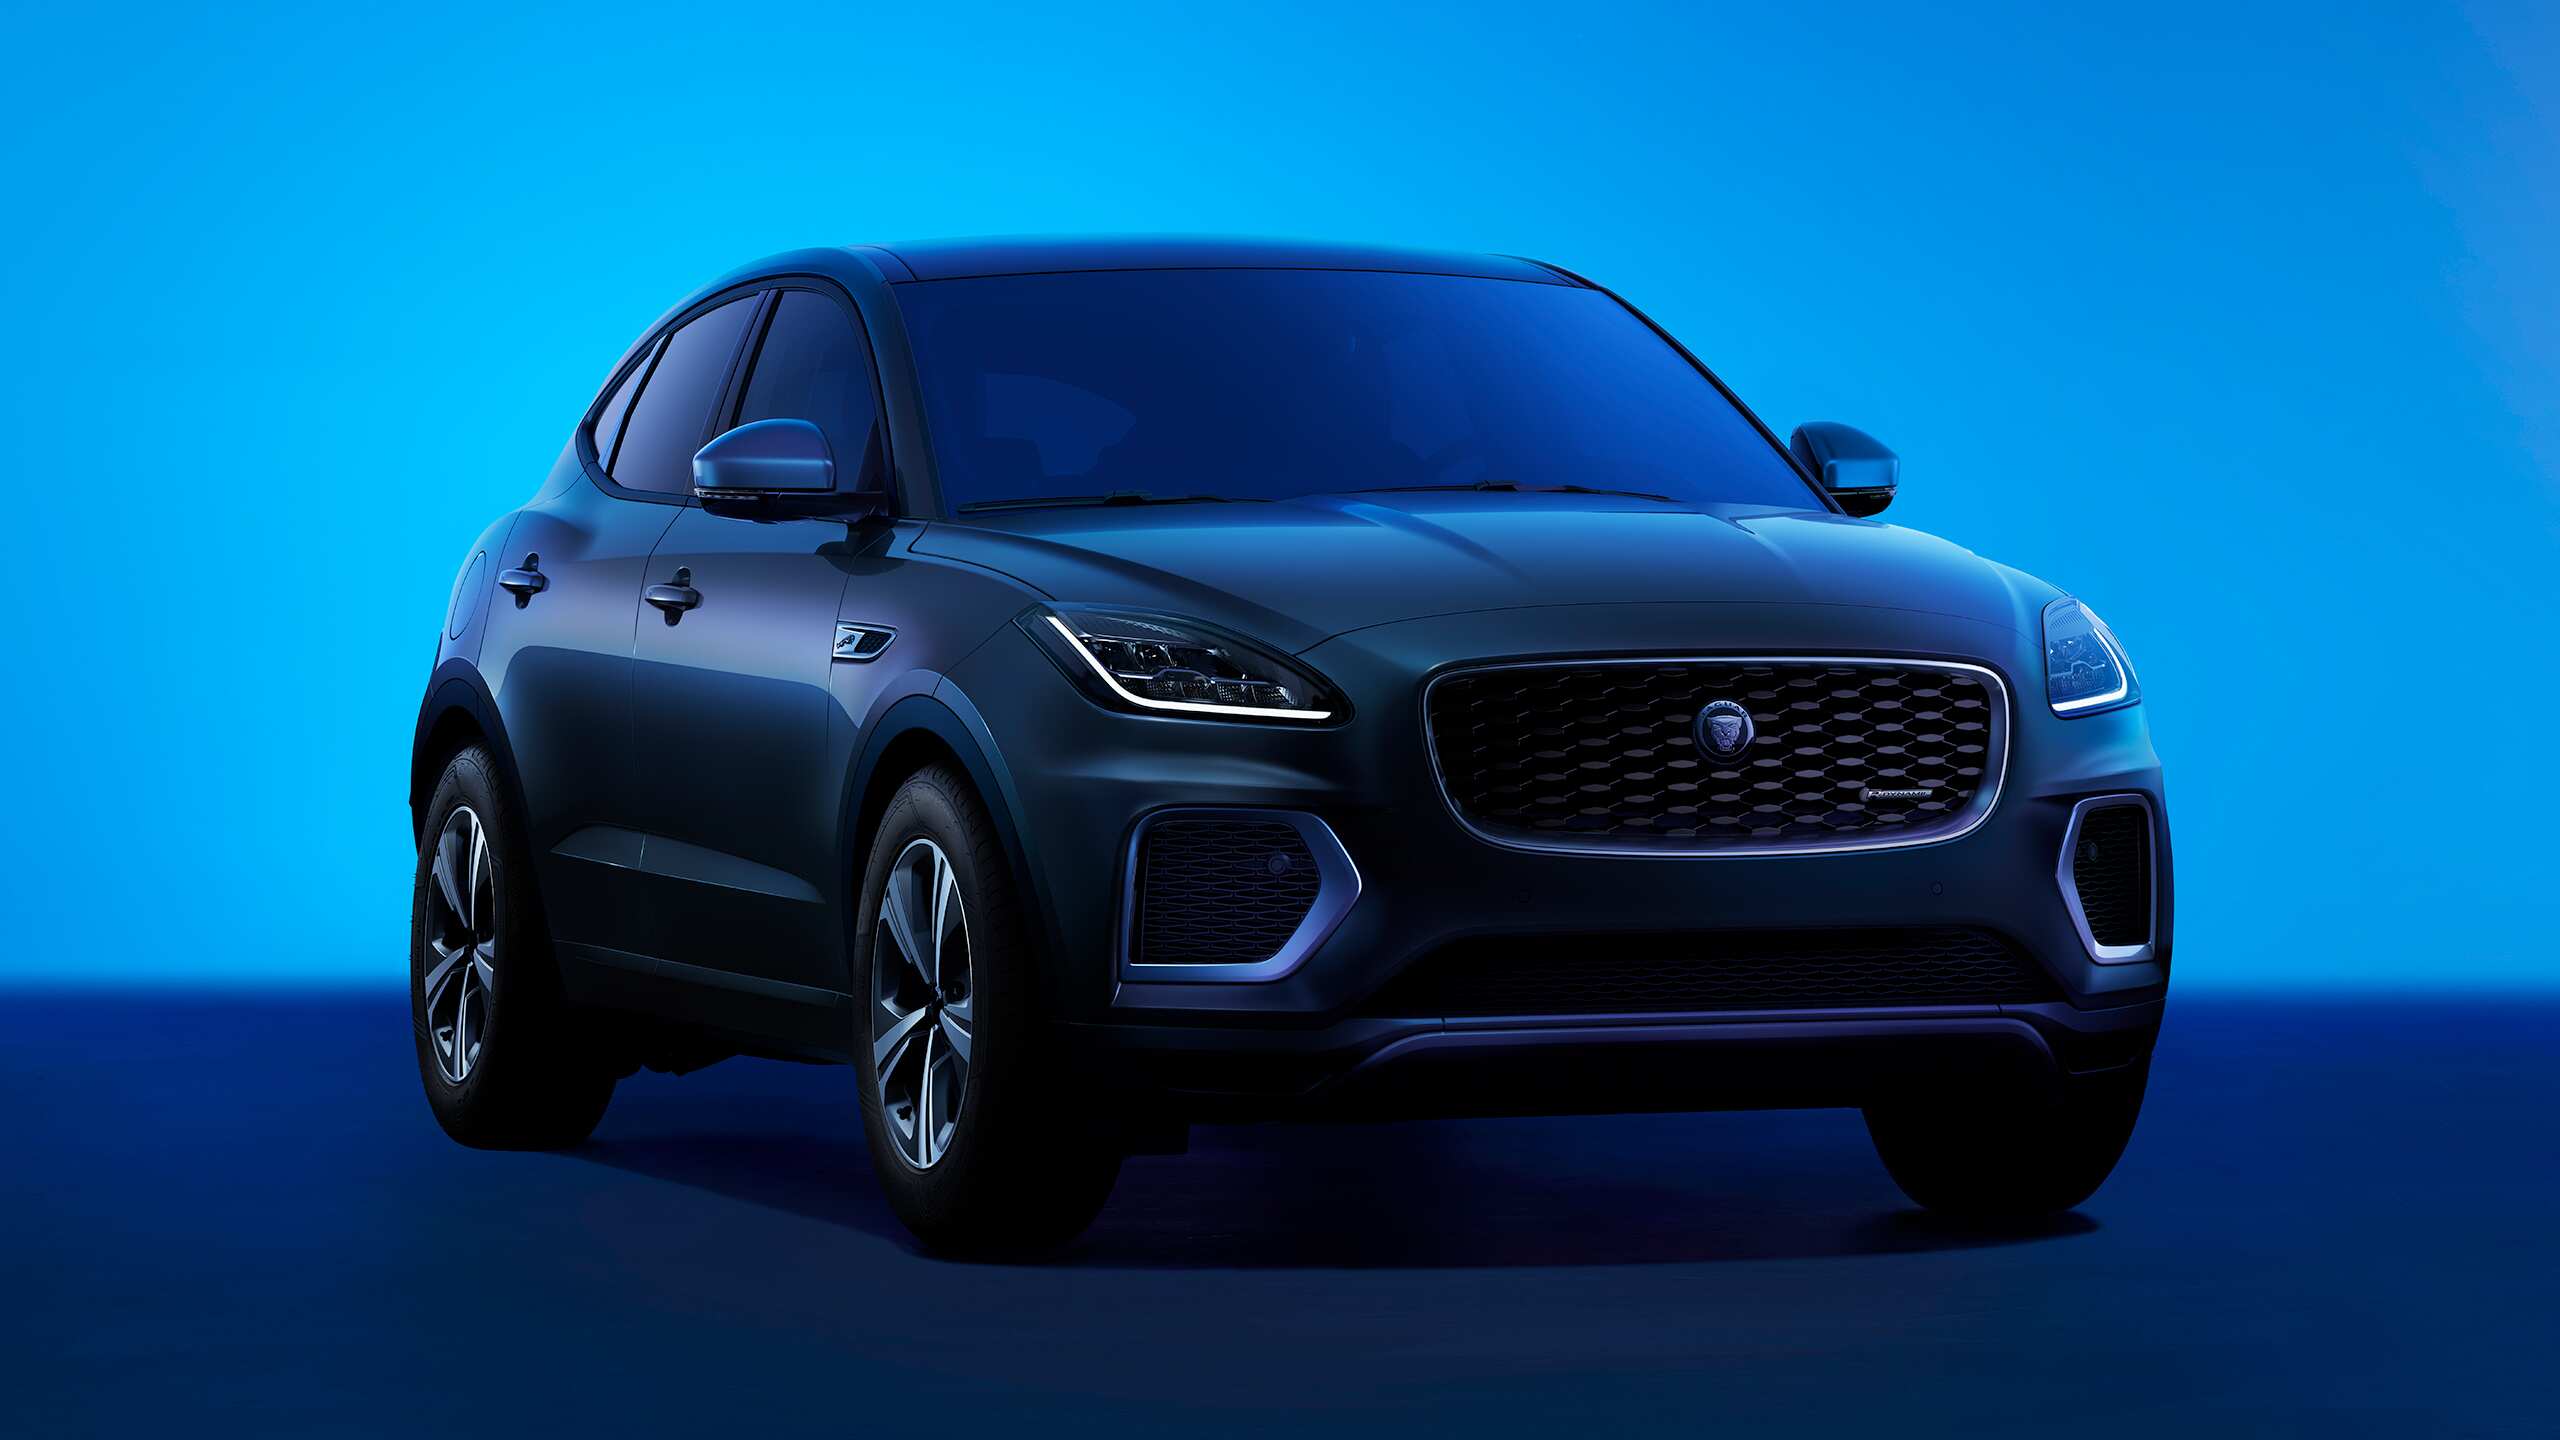 Jaguar E-Pace R-dyanamic S model in shades of blue background